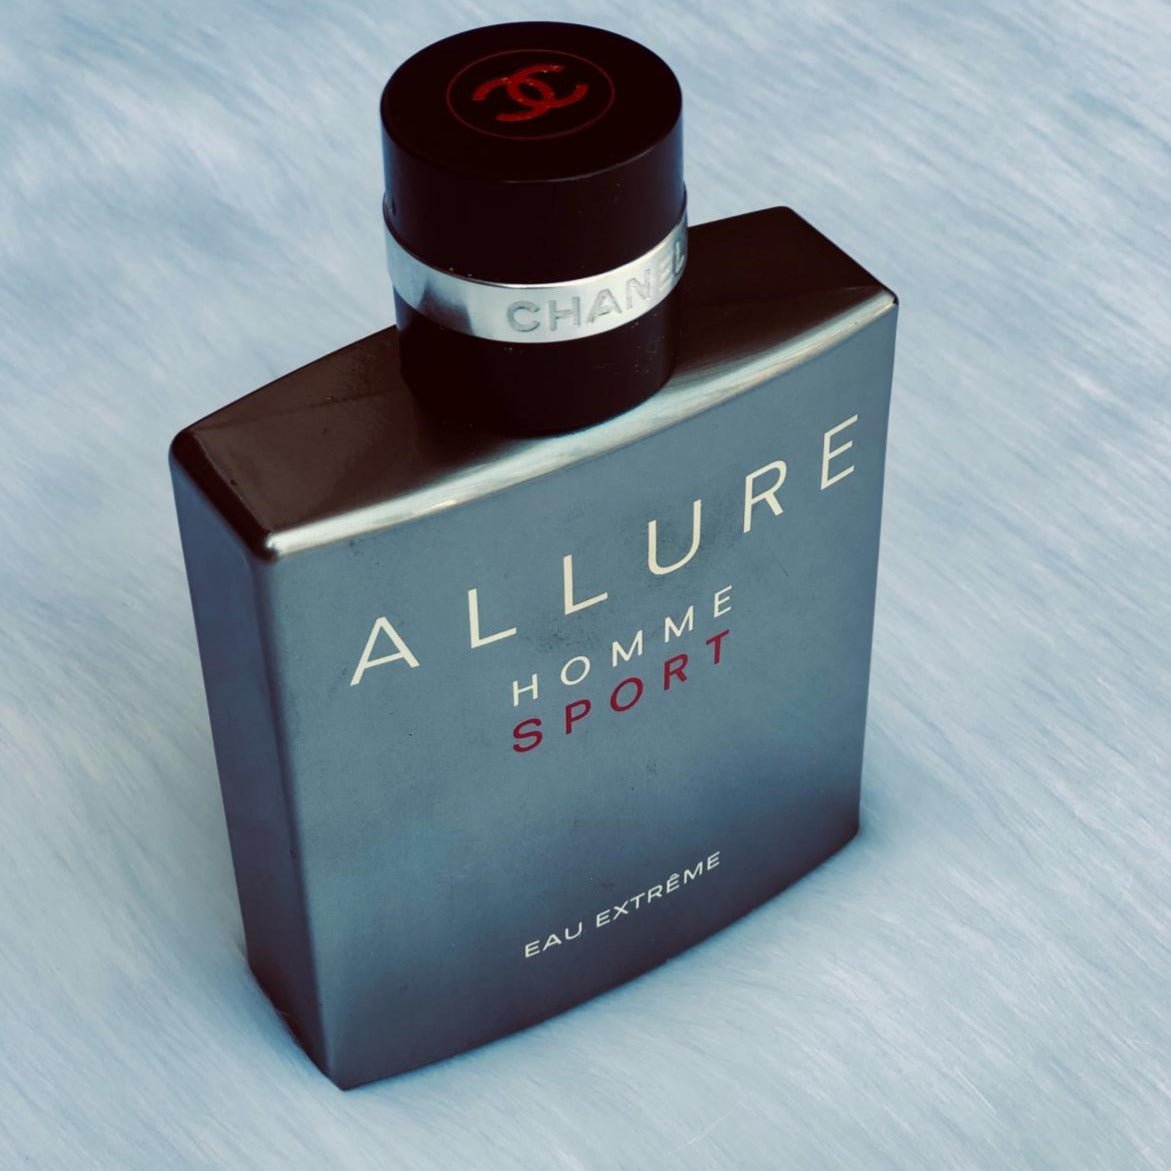 Chanel Allure Homme Sport After Shave Lotion | My Perfume Shop Australia